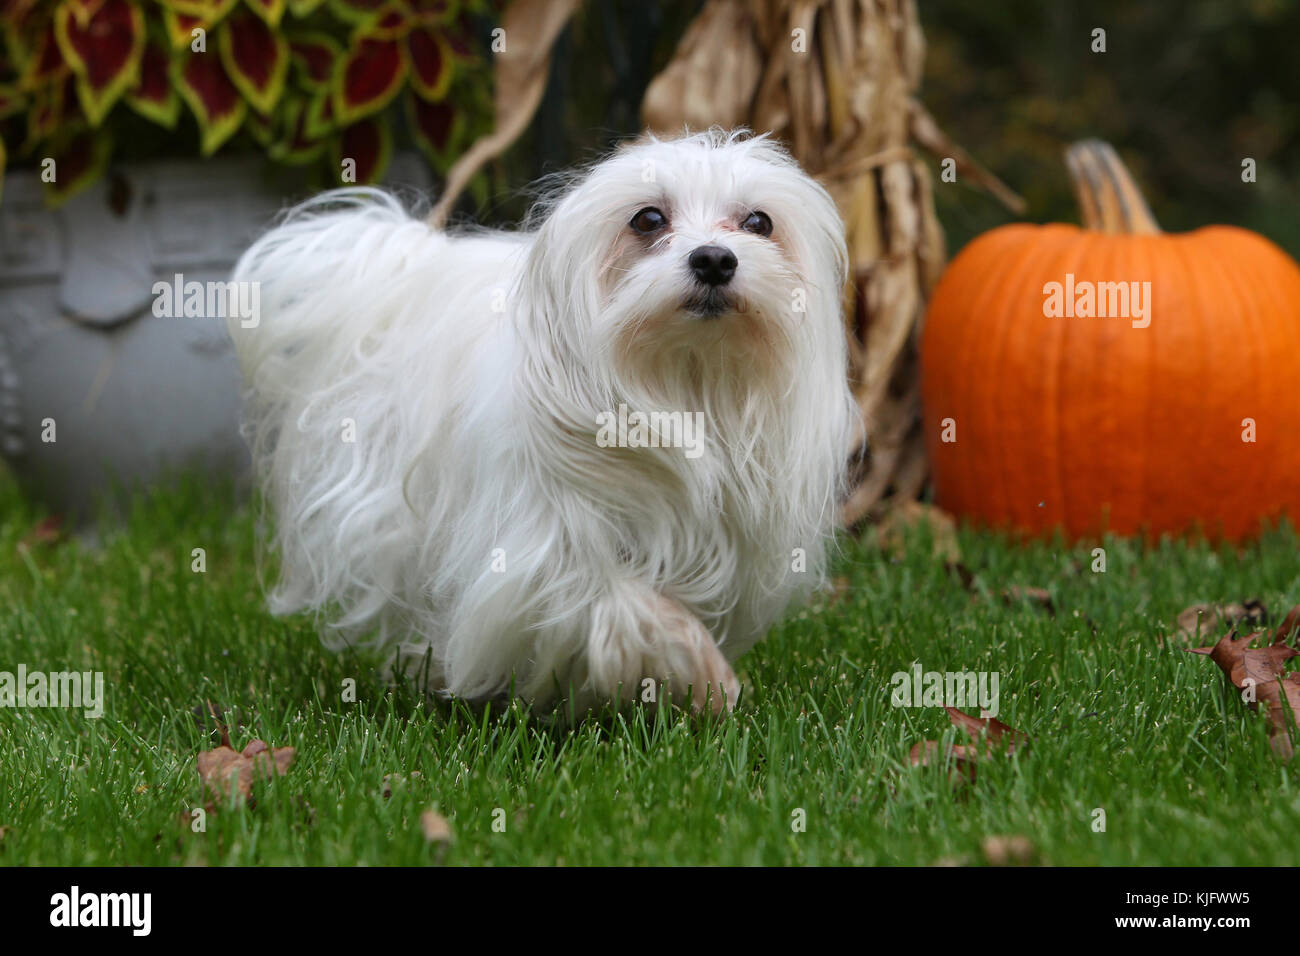 Maltese Maltese Terrier Straight-haired Bichon looking up walking on grass  with fallen leaves with pumpkin in background Stock Photo - Alamy